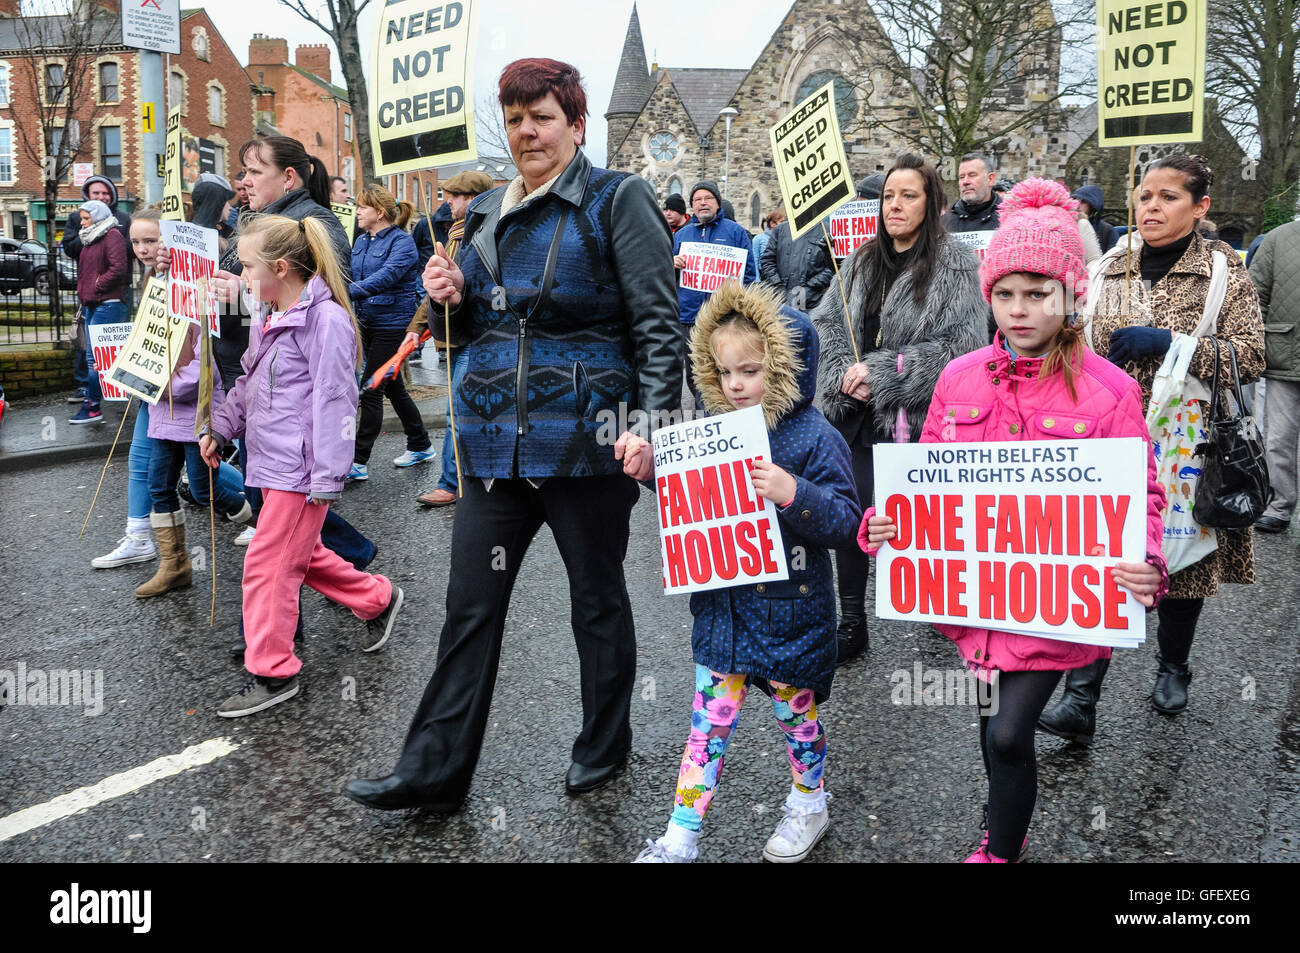 Belfast, Northern Ireland, 1 Feb 2014 - Women and children march in a protest by North Belfast Civil Rights Association protest against lack of social housing and facilities in Belfast. Stock Photo